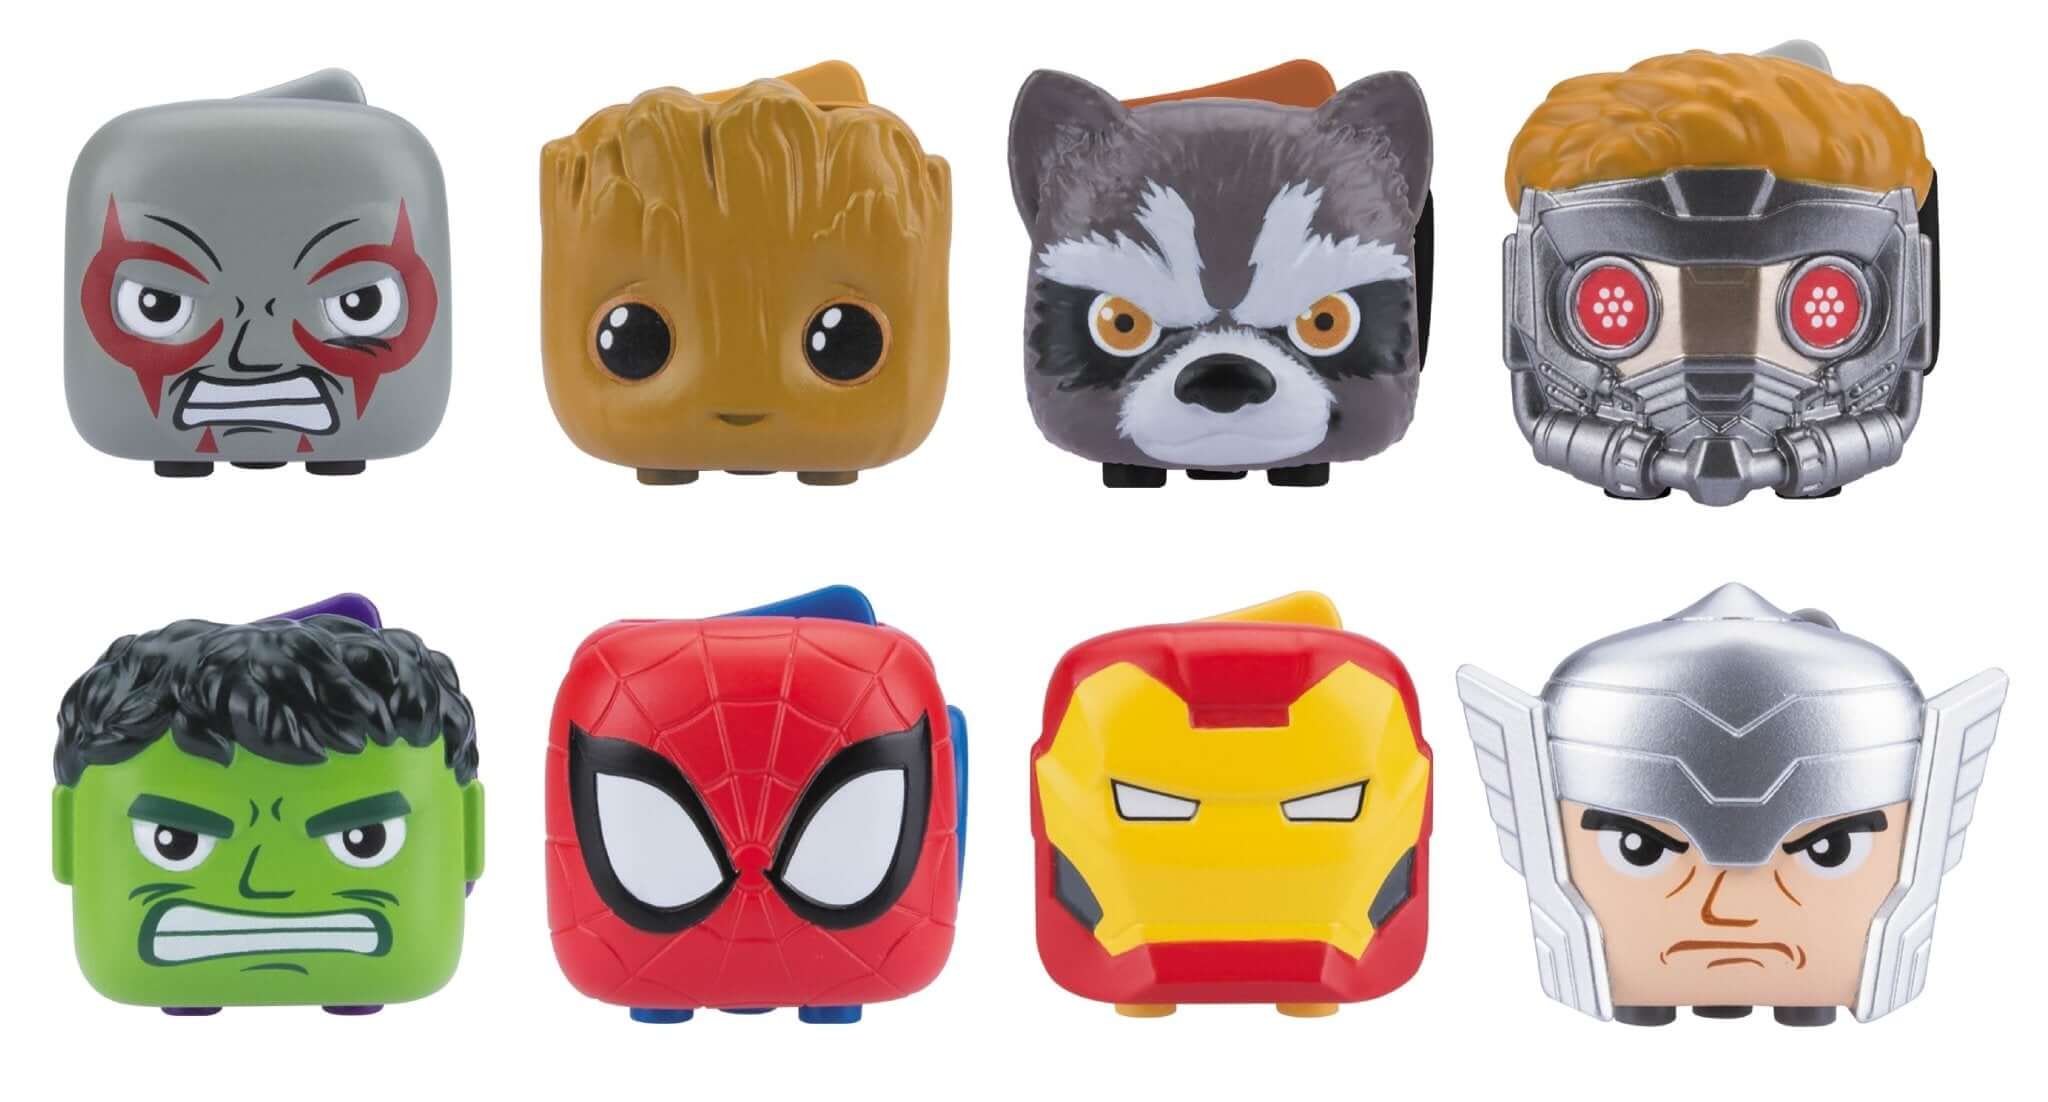 Get Your Marvel Fidget Spinner at the Home of Fidget Cube